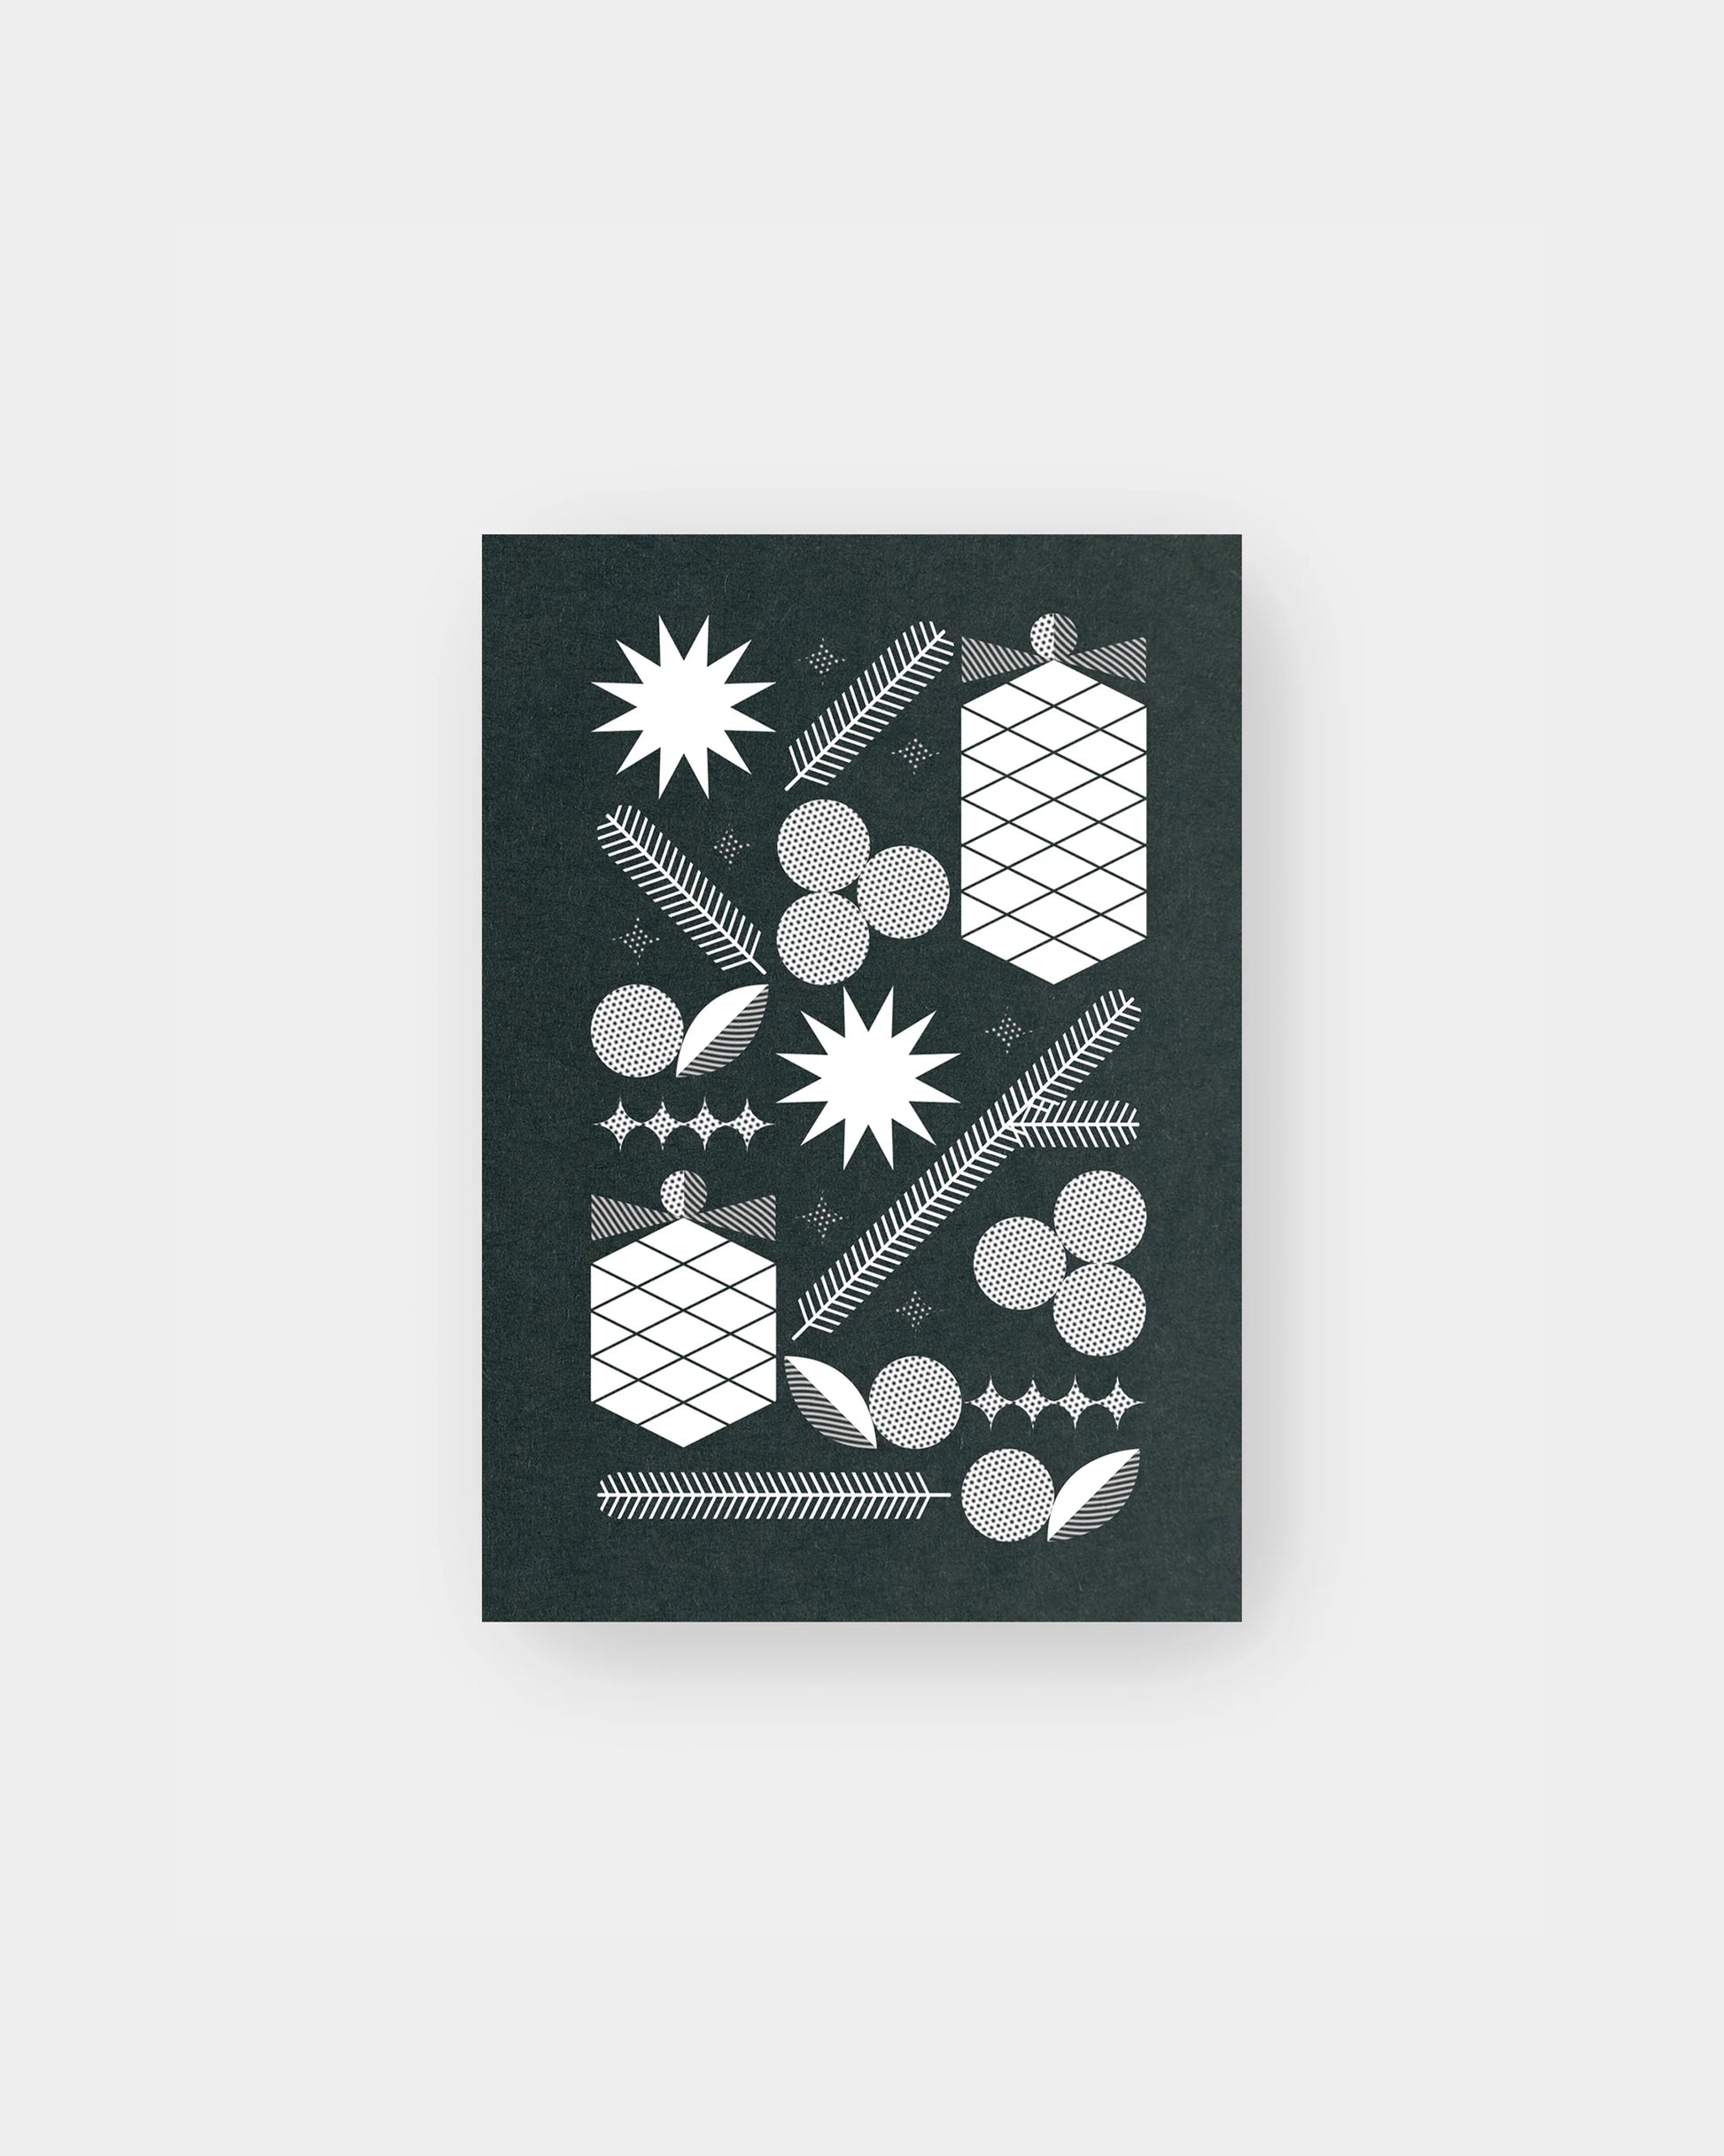 Bauhaus inspired pinecone and berry motif on greeting card. 3.5 x 5", evergreen colorway.